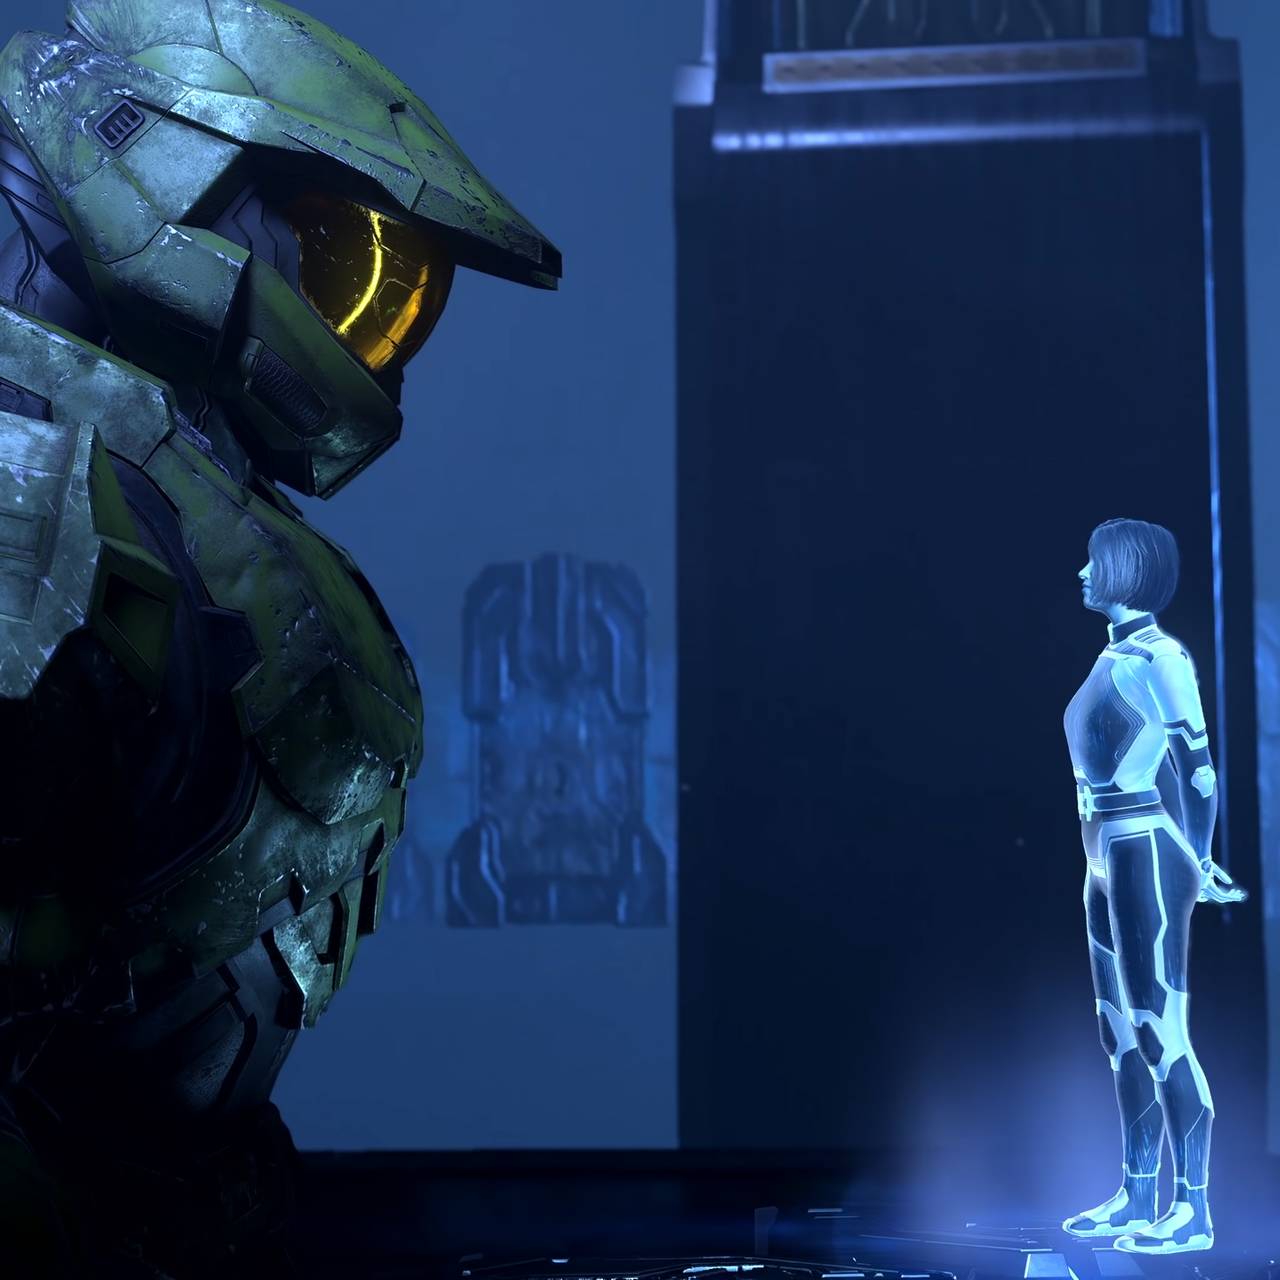 The game character Master Chief looks at a character surrounded by a luminous aura - a new artificial intelligence.  From the game 